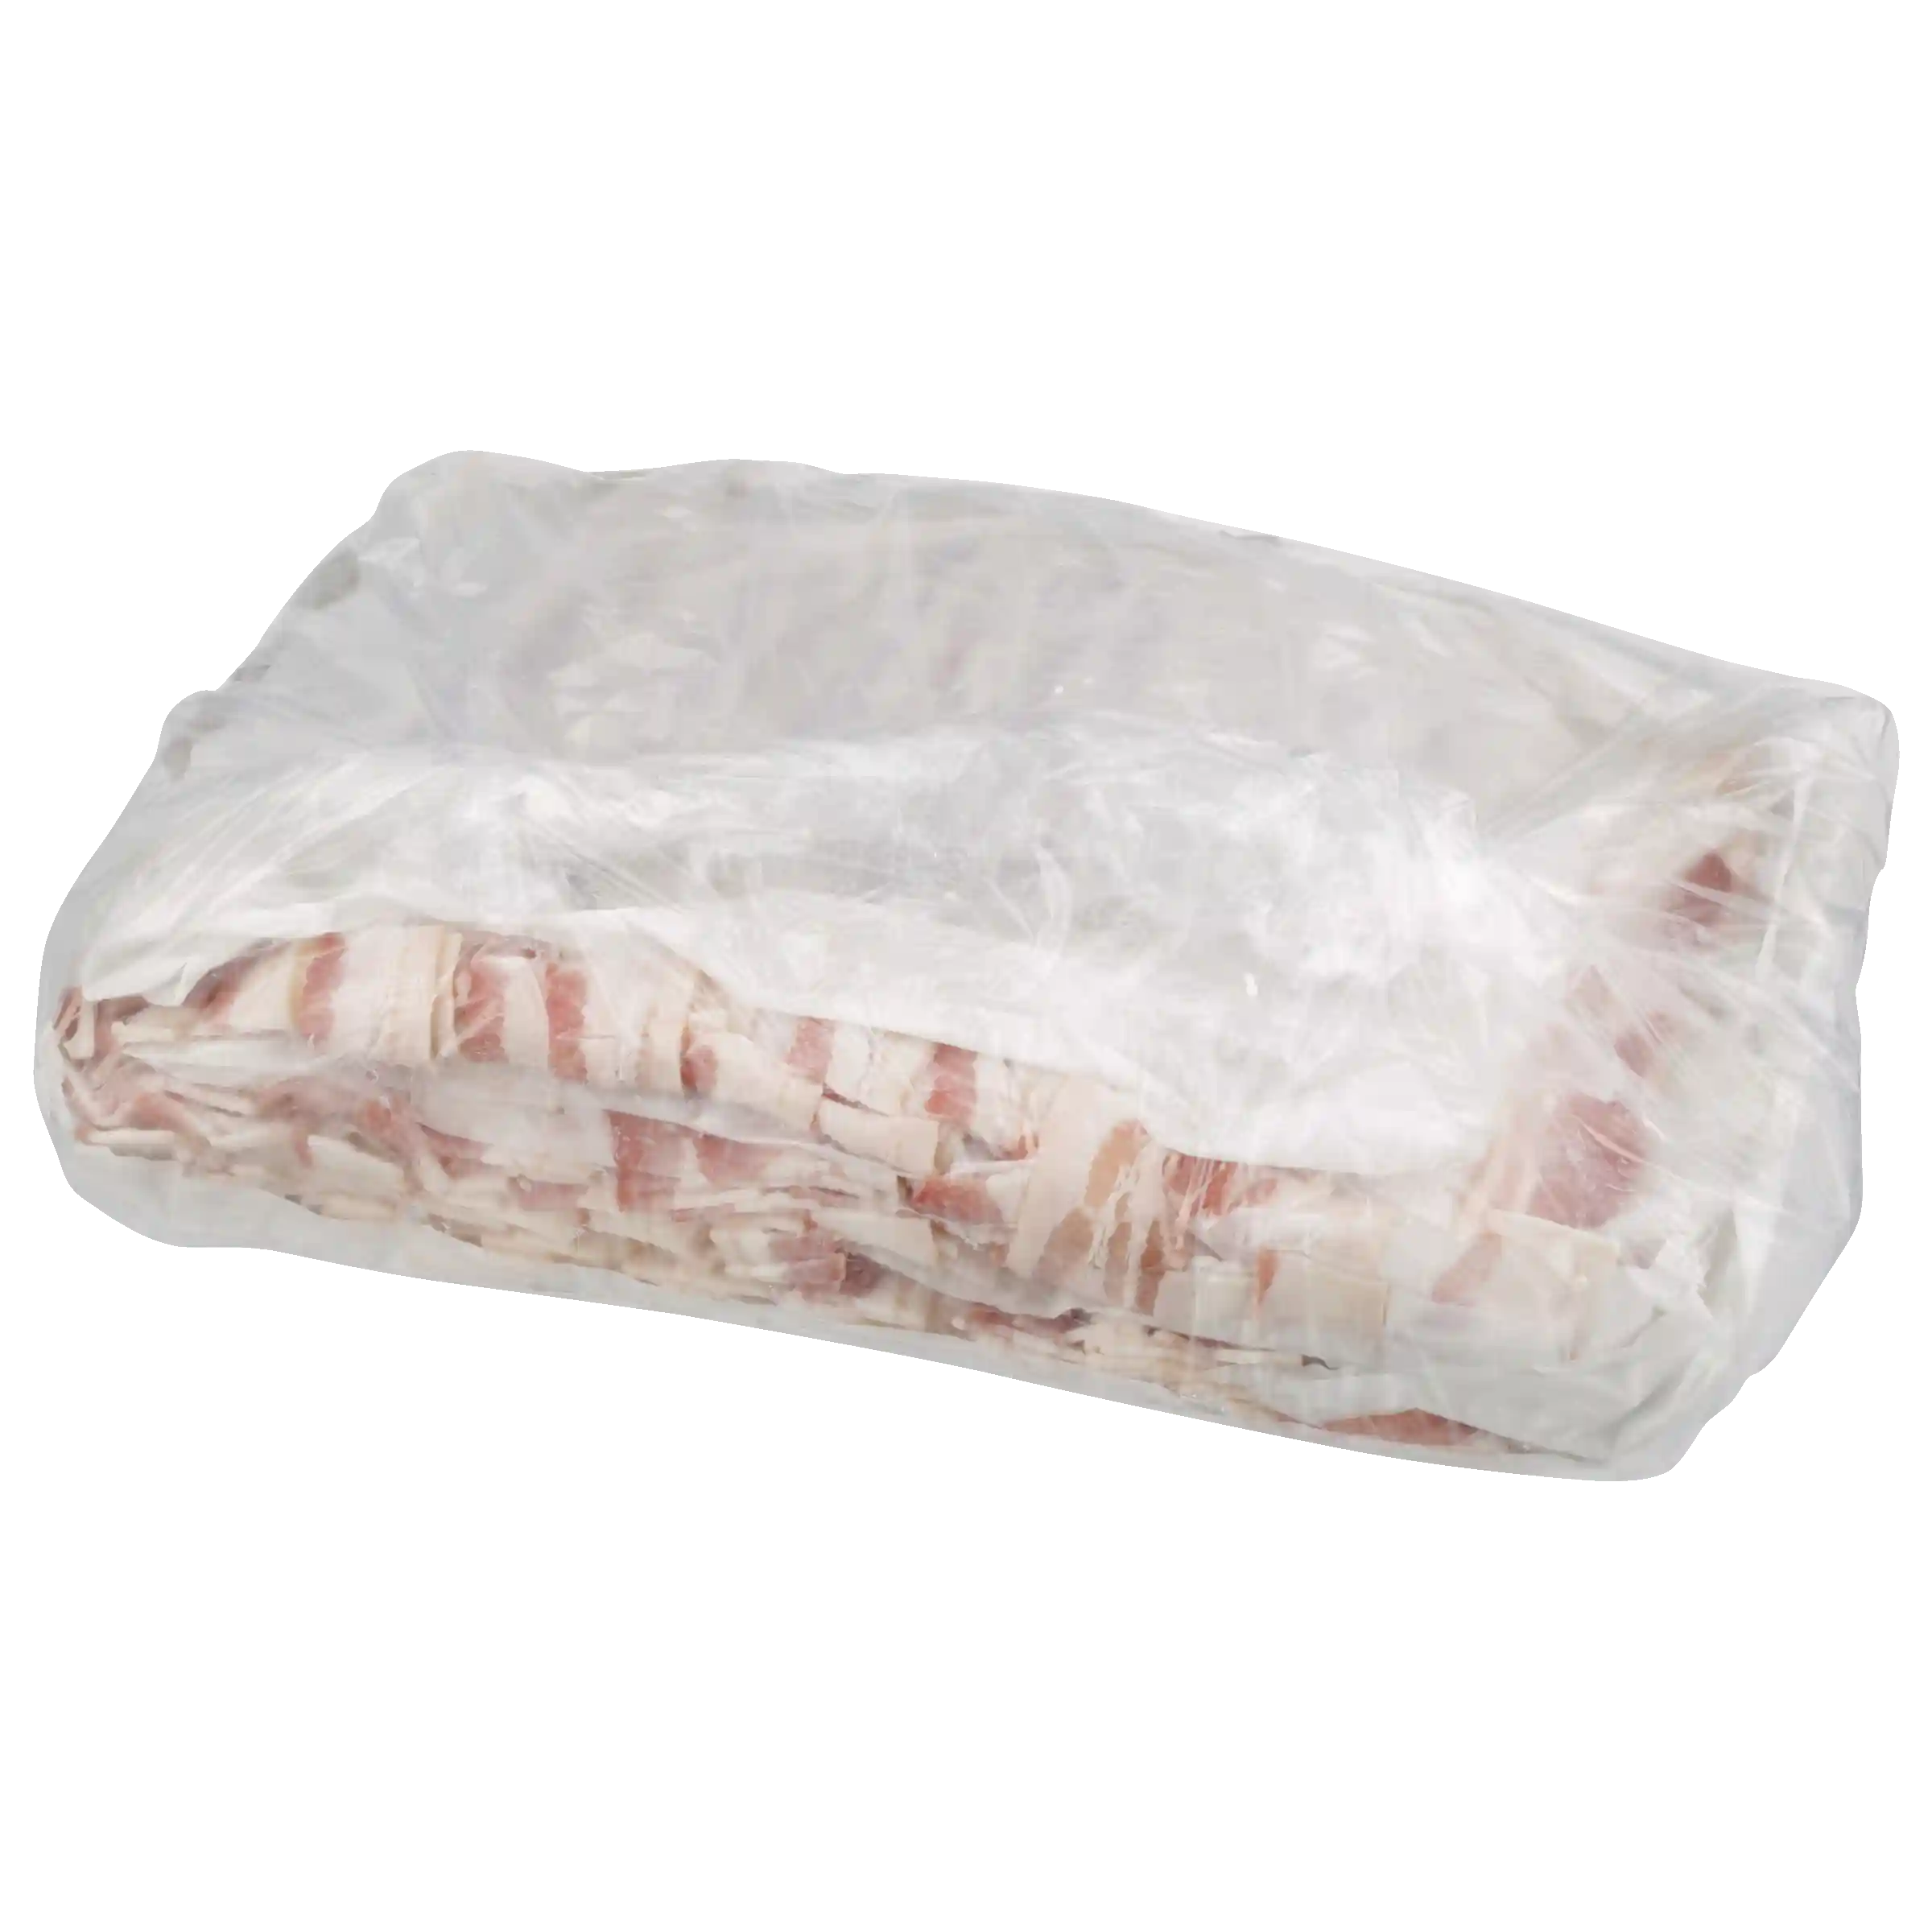 Wright® Brand Naturally Hickory Smoked Thin Sliced Bacon, Flat-Pack®, 15 Lbs, 18-22 Slices per Pound, Frozen_image_31